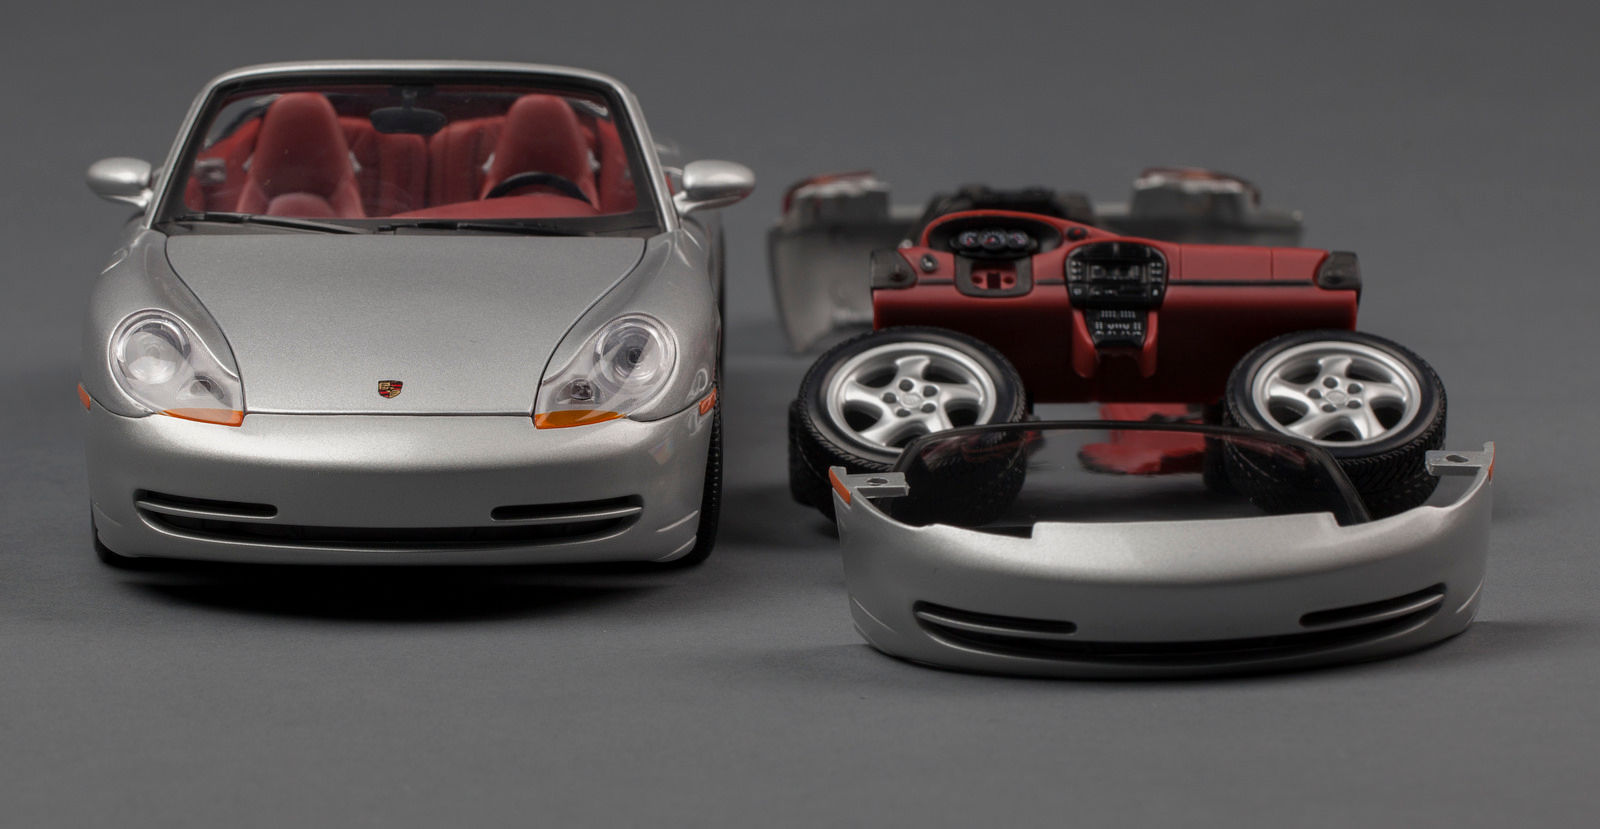 Illustration for article titled Gate/UT/AutoArt 996 Carrera Cabriolet